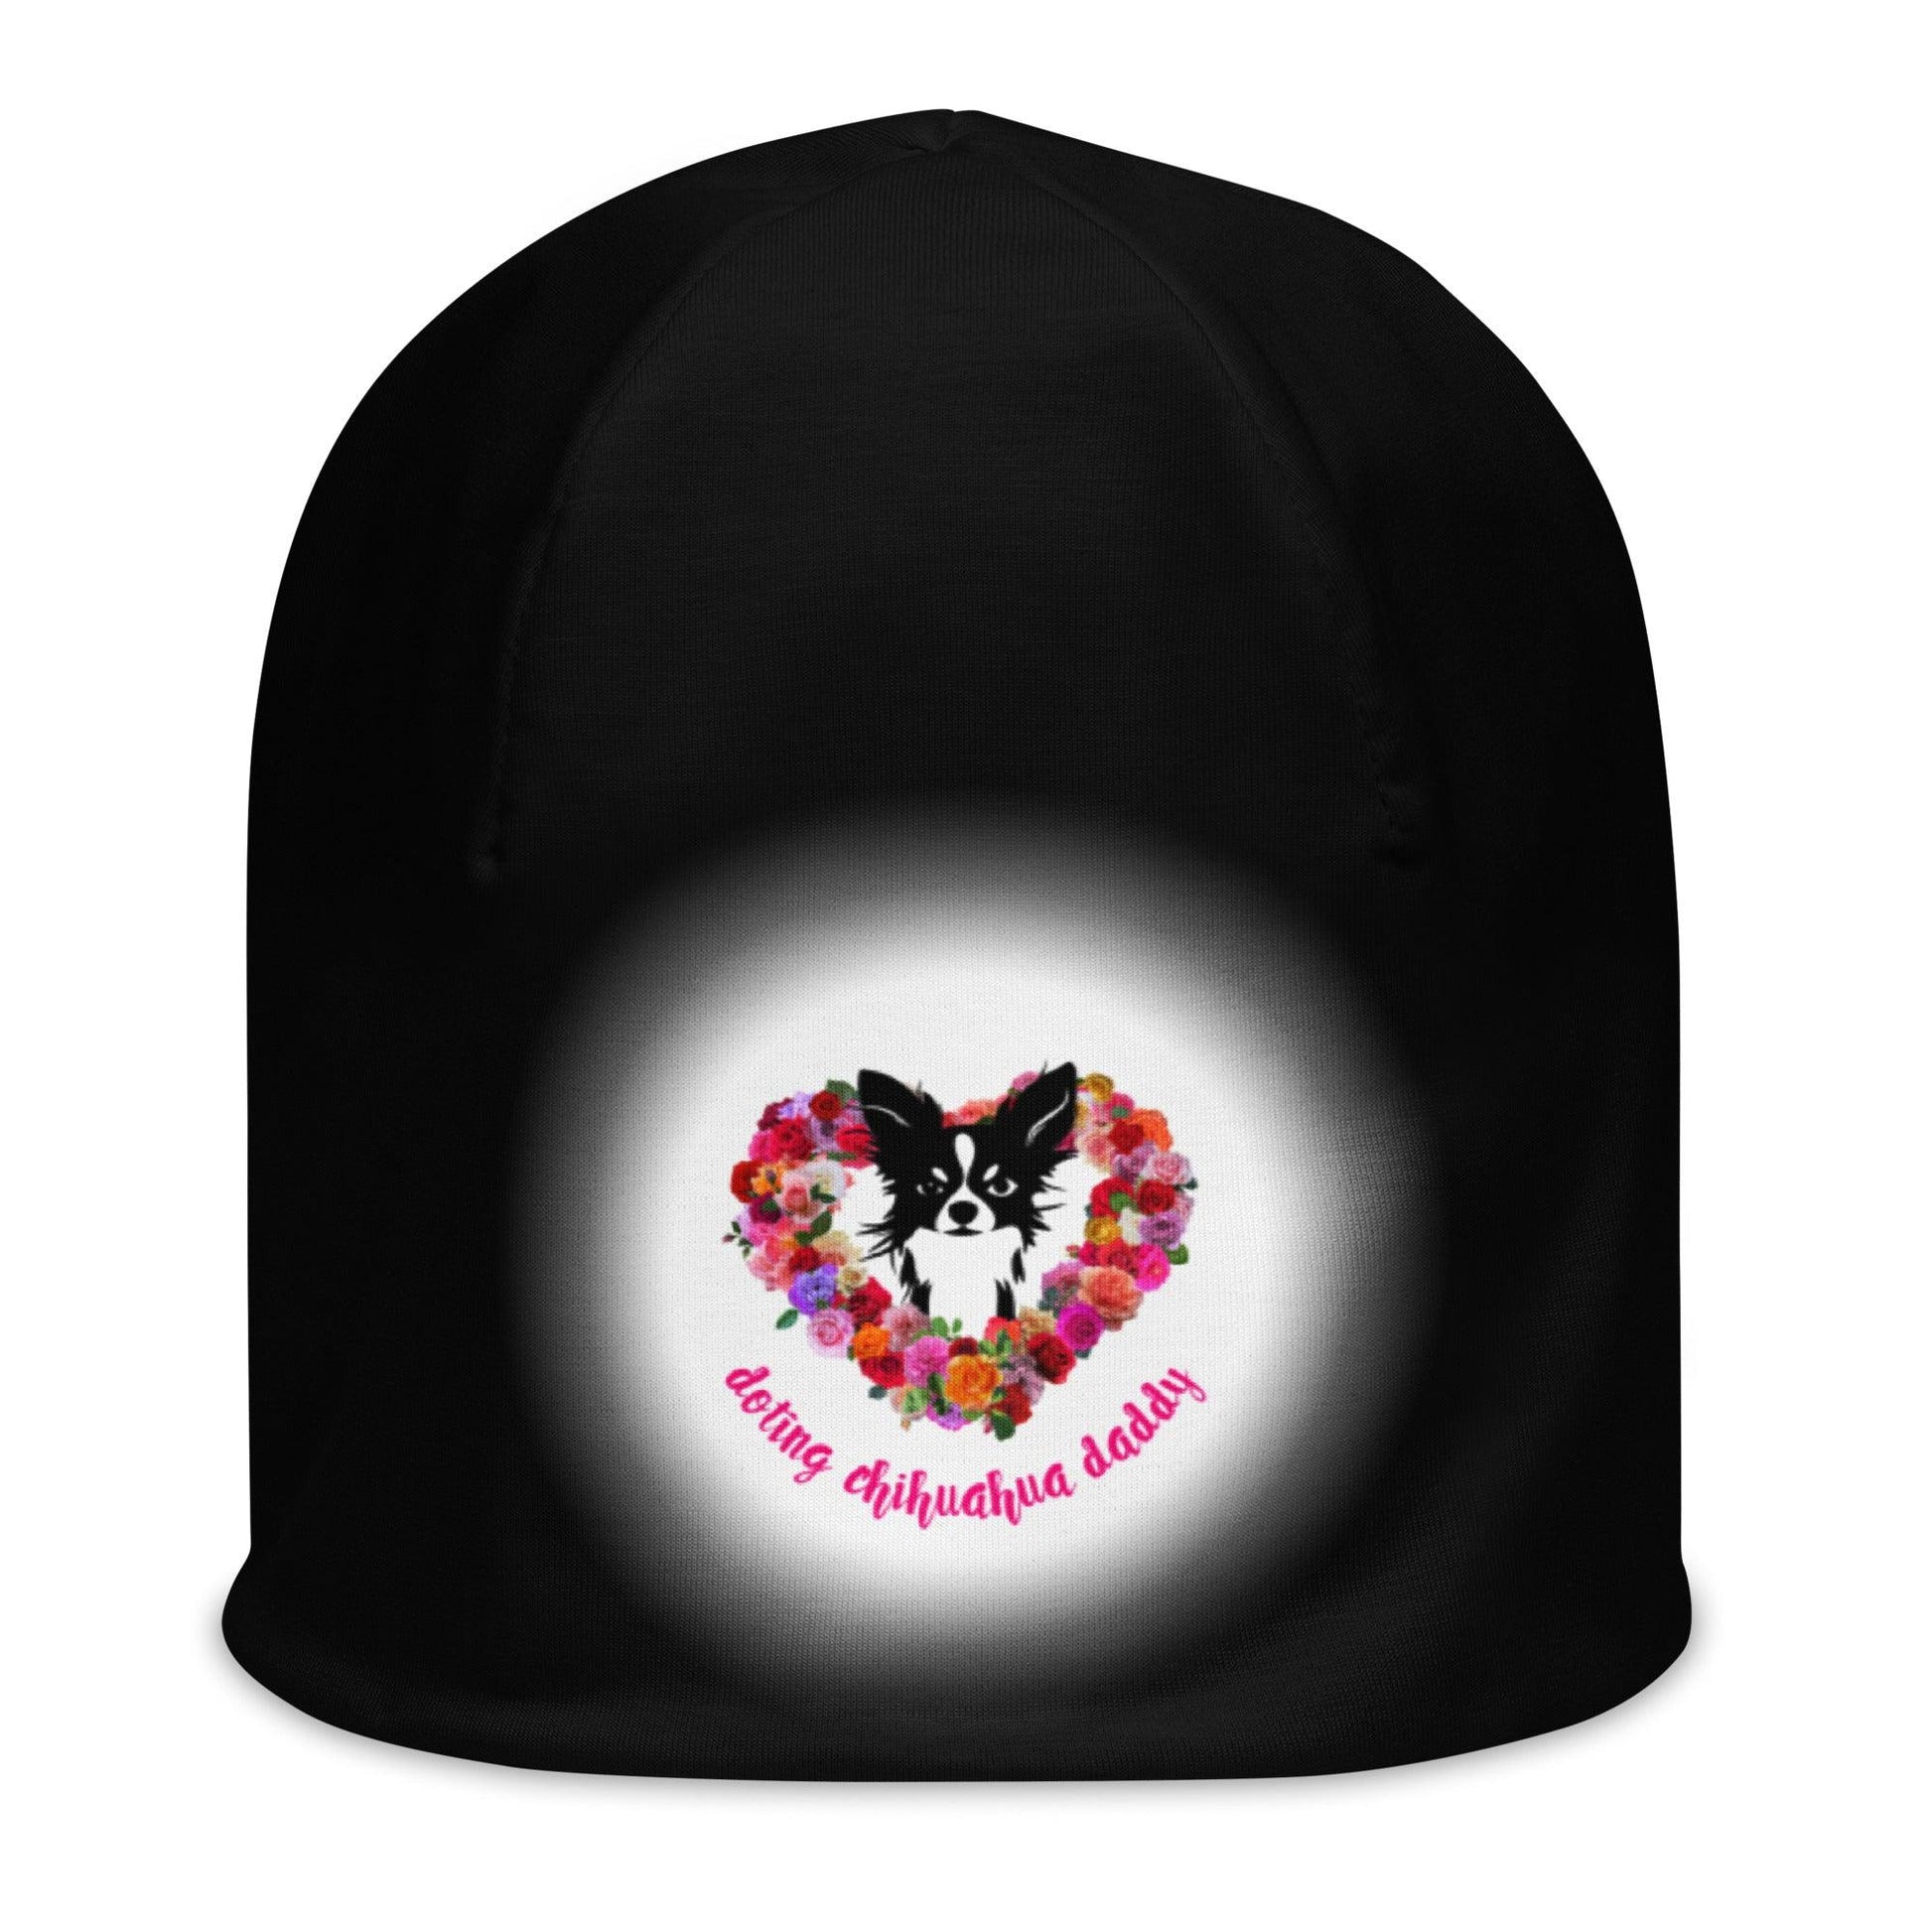 Real men love chihuahuas. Chihuahua daddies are sexy! Forget guns and roses; Chimigos gives you a chihuahua and roses. Divine. Adorable. Slay. SEXY! This soft and comfy chihuahua and roses black beanie makes the perfect Father's Day / birthday / Christmas gift for a doting chihuahua daddy. Design by Renate Kriegler for Chimigos.